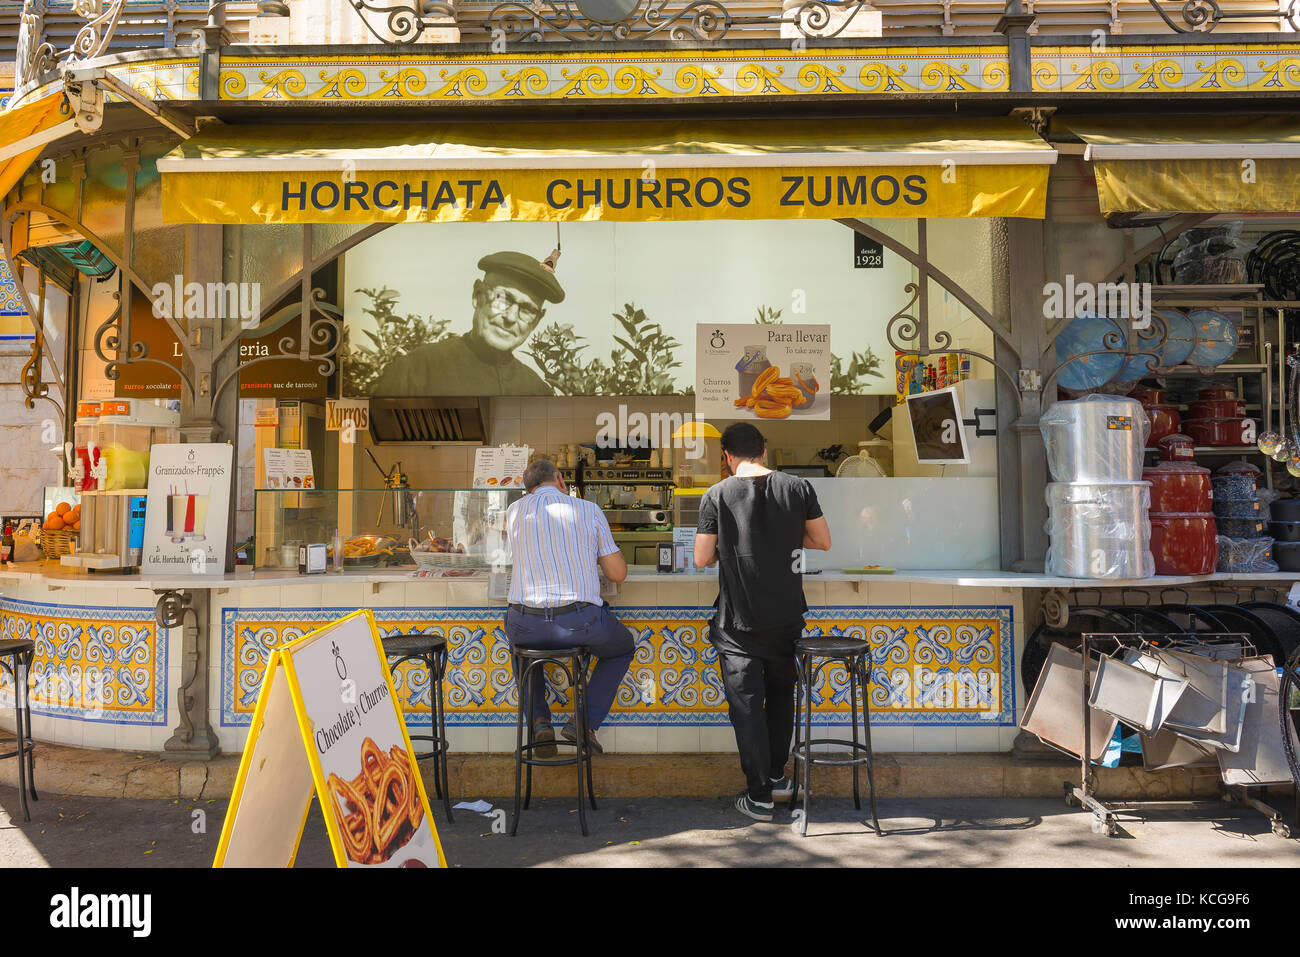 Spain street food, view of two men using a street food kiosk specialising in churros and horchata in the old town district of Valencia, Spain. Stock Photo